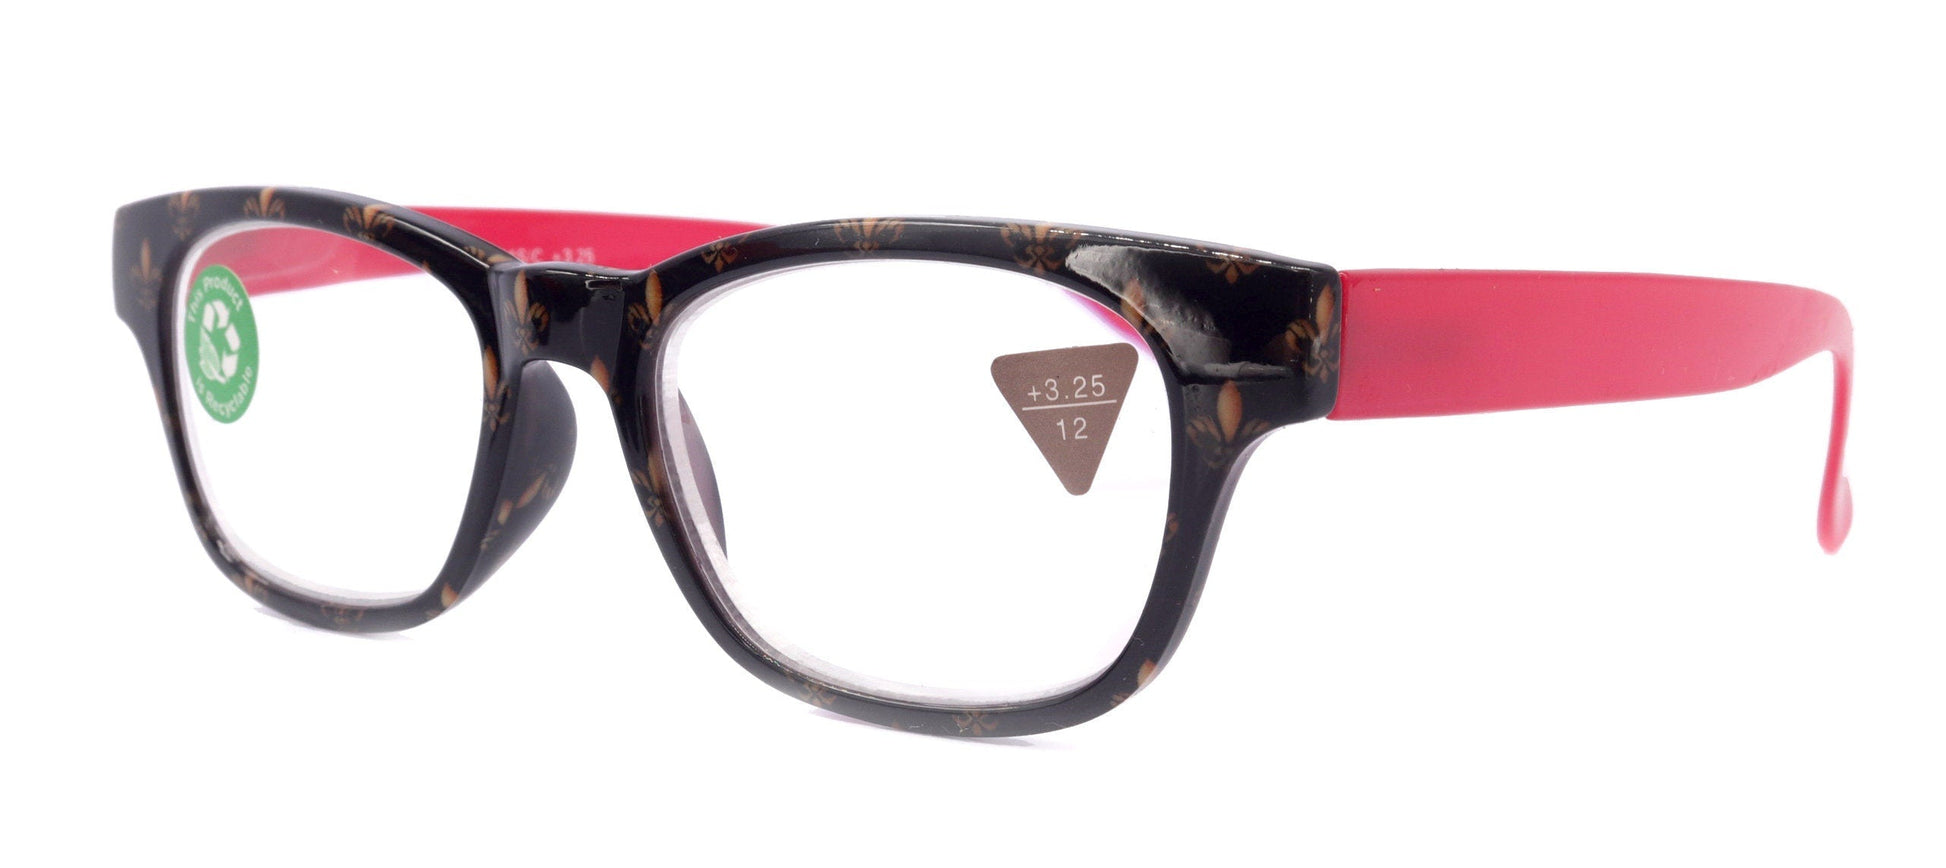 Lilly, (Premium) Reading Glasses (Fleur De Lis) +1 .. +3 Magnifying, Fashion Square Optical Frame. (Red, Gold, Black) NY Fifth Avenue.